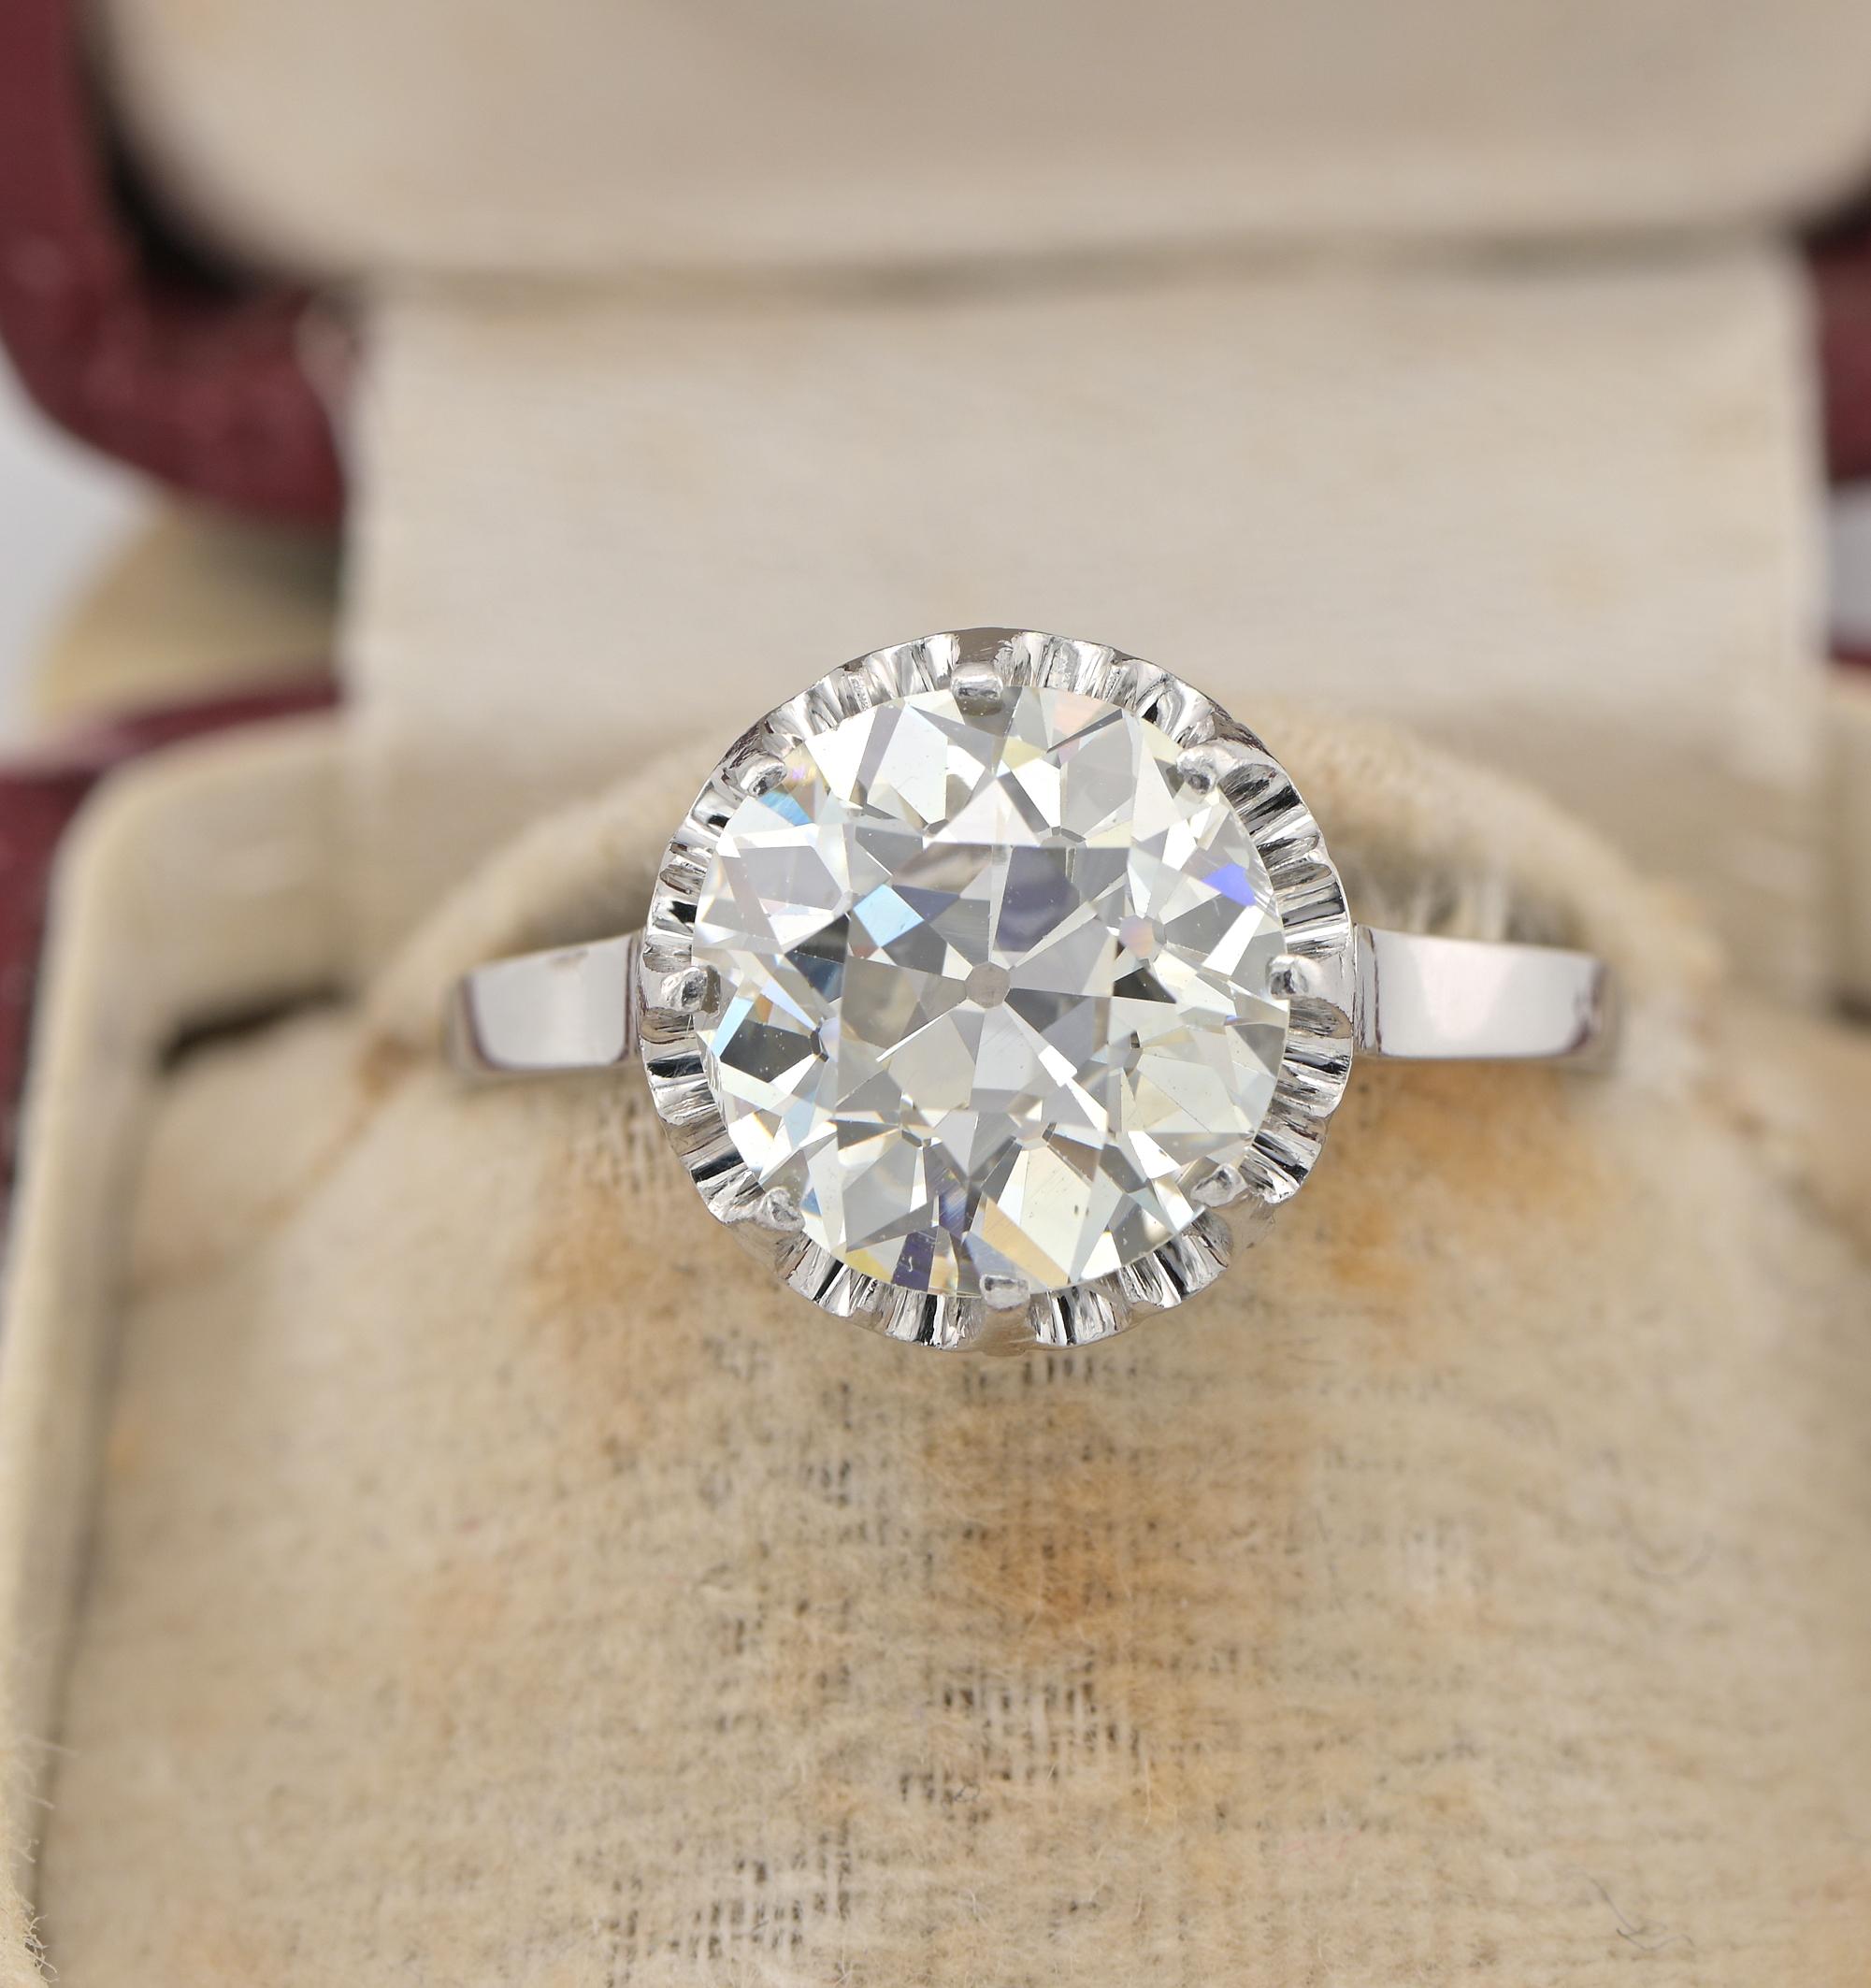 Diamonds For Ever
This stunning antique Art Deco period Diamond solitaire ring is the understated tradition for design and size
A bright white, perfect in size, old cut Diamond stands in a simple yet effective classy mount originated in the 20’s to